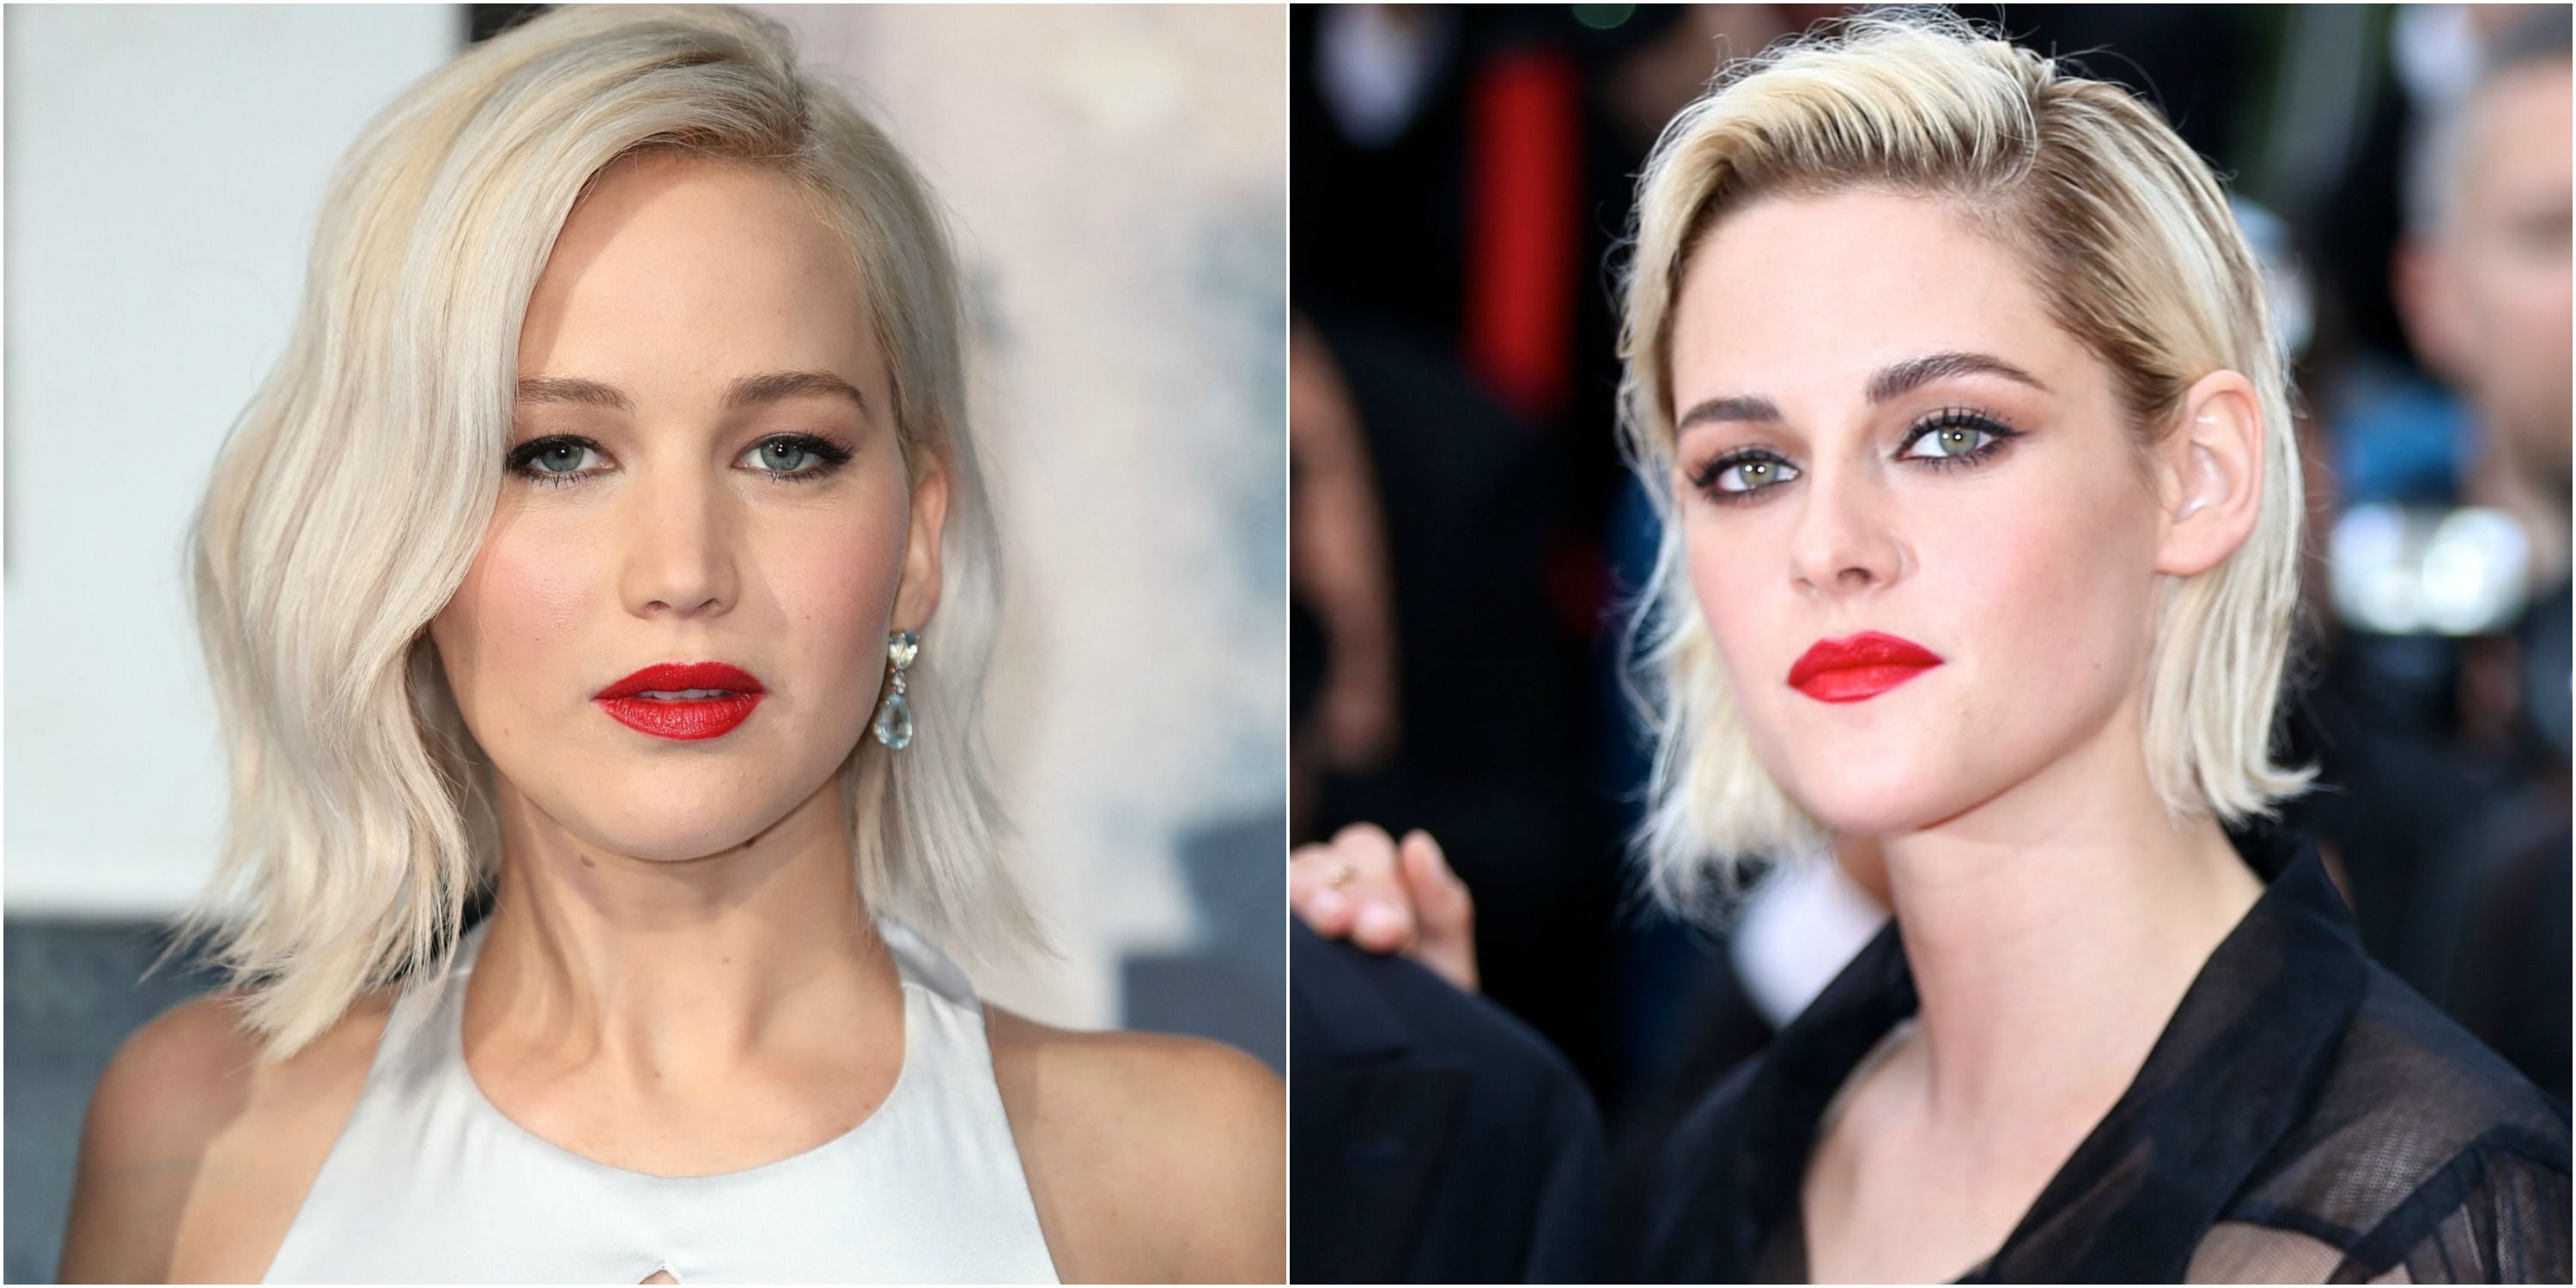 4. "Icy Blonde vs. Platinum Blonde: What's the Difference?" - wide 7